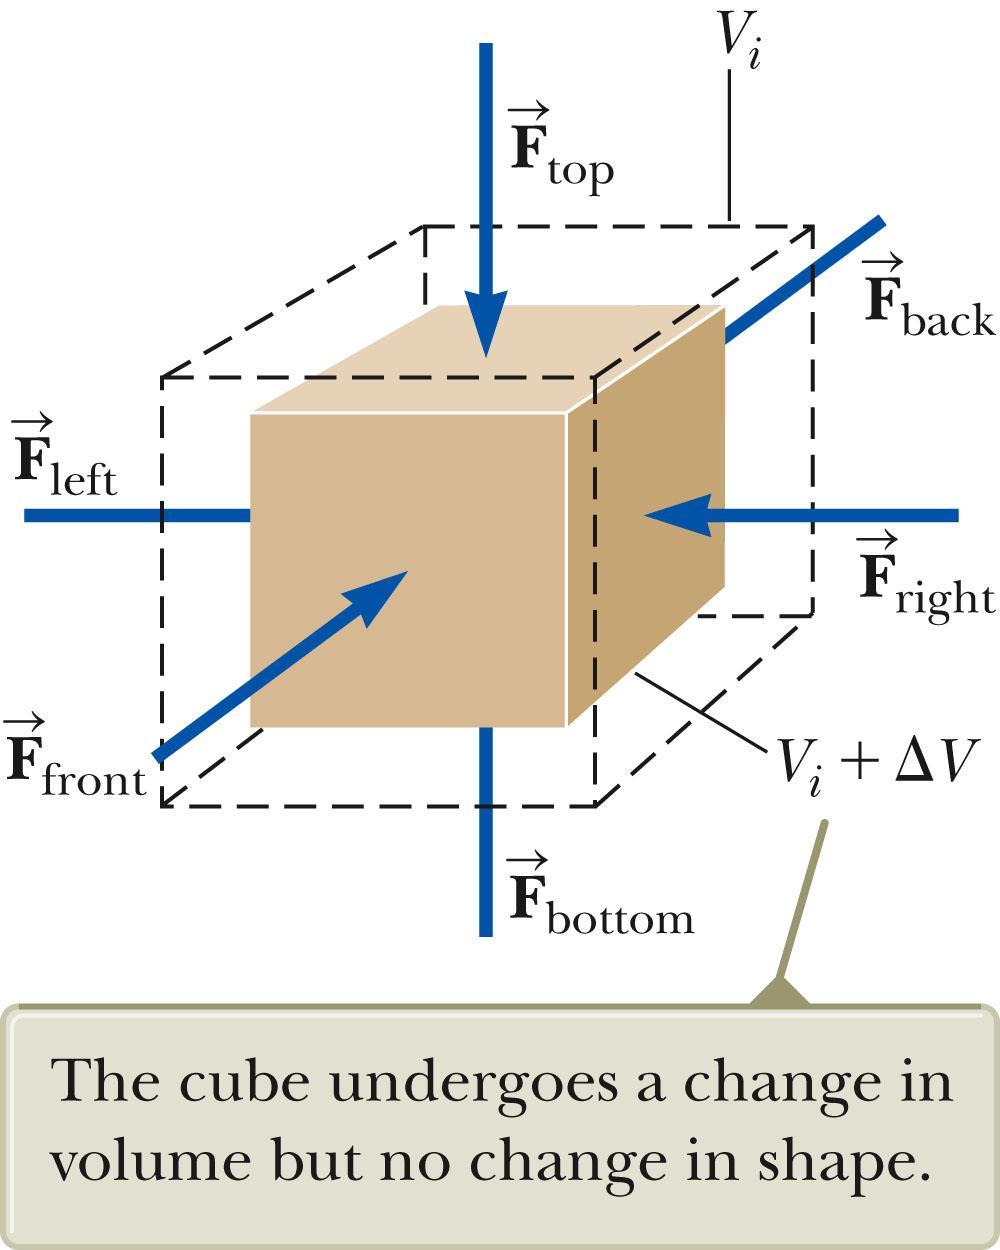 Bulk Modulus Another type of deformation occurs when a force of uniform magnitude is applied perpendicularly over the entire surface of the object.